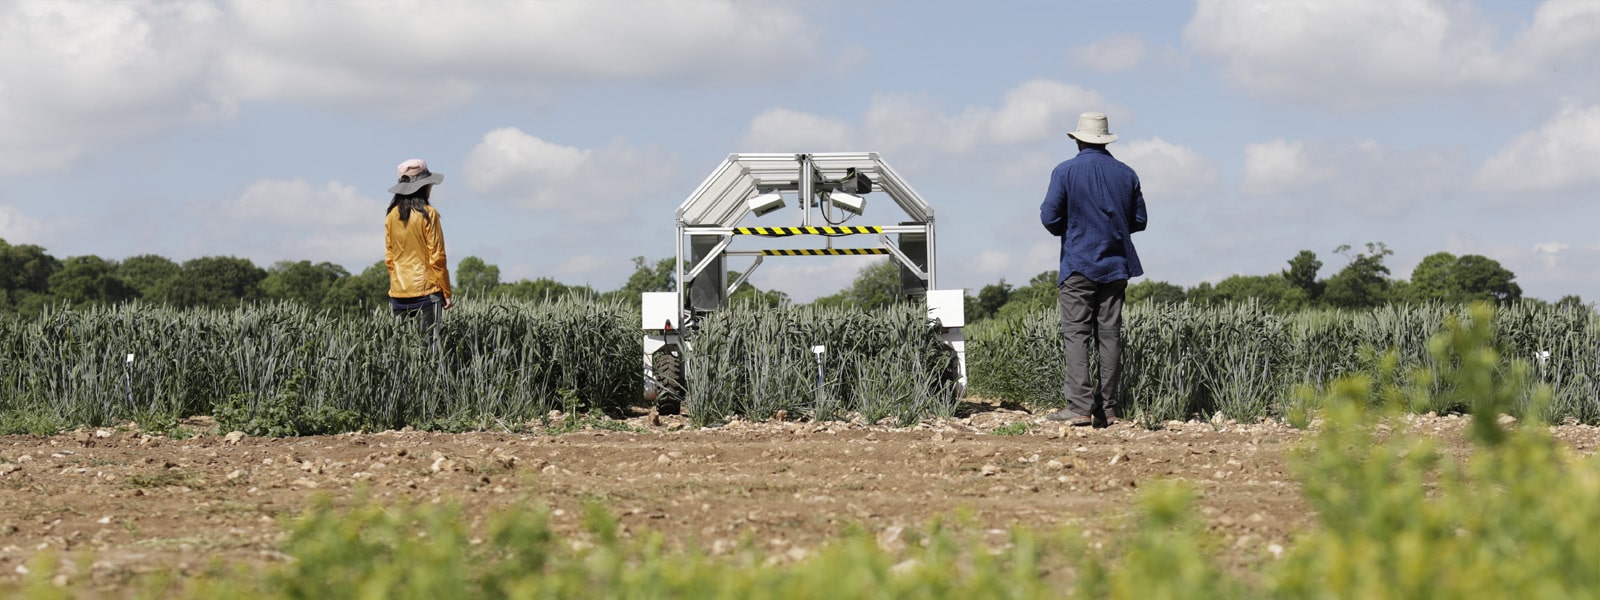 Researchers working with robotics in a field of crops